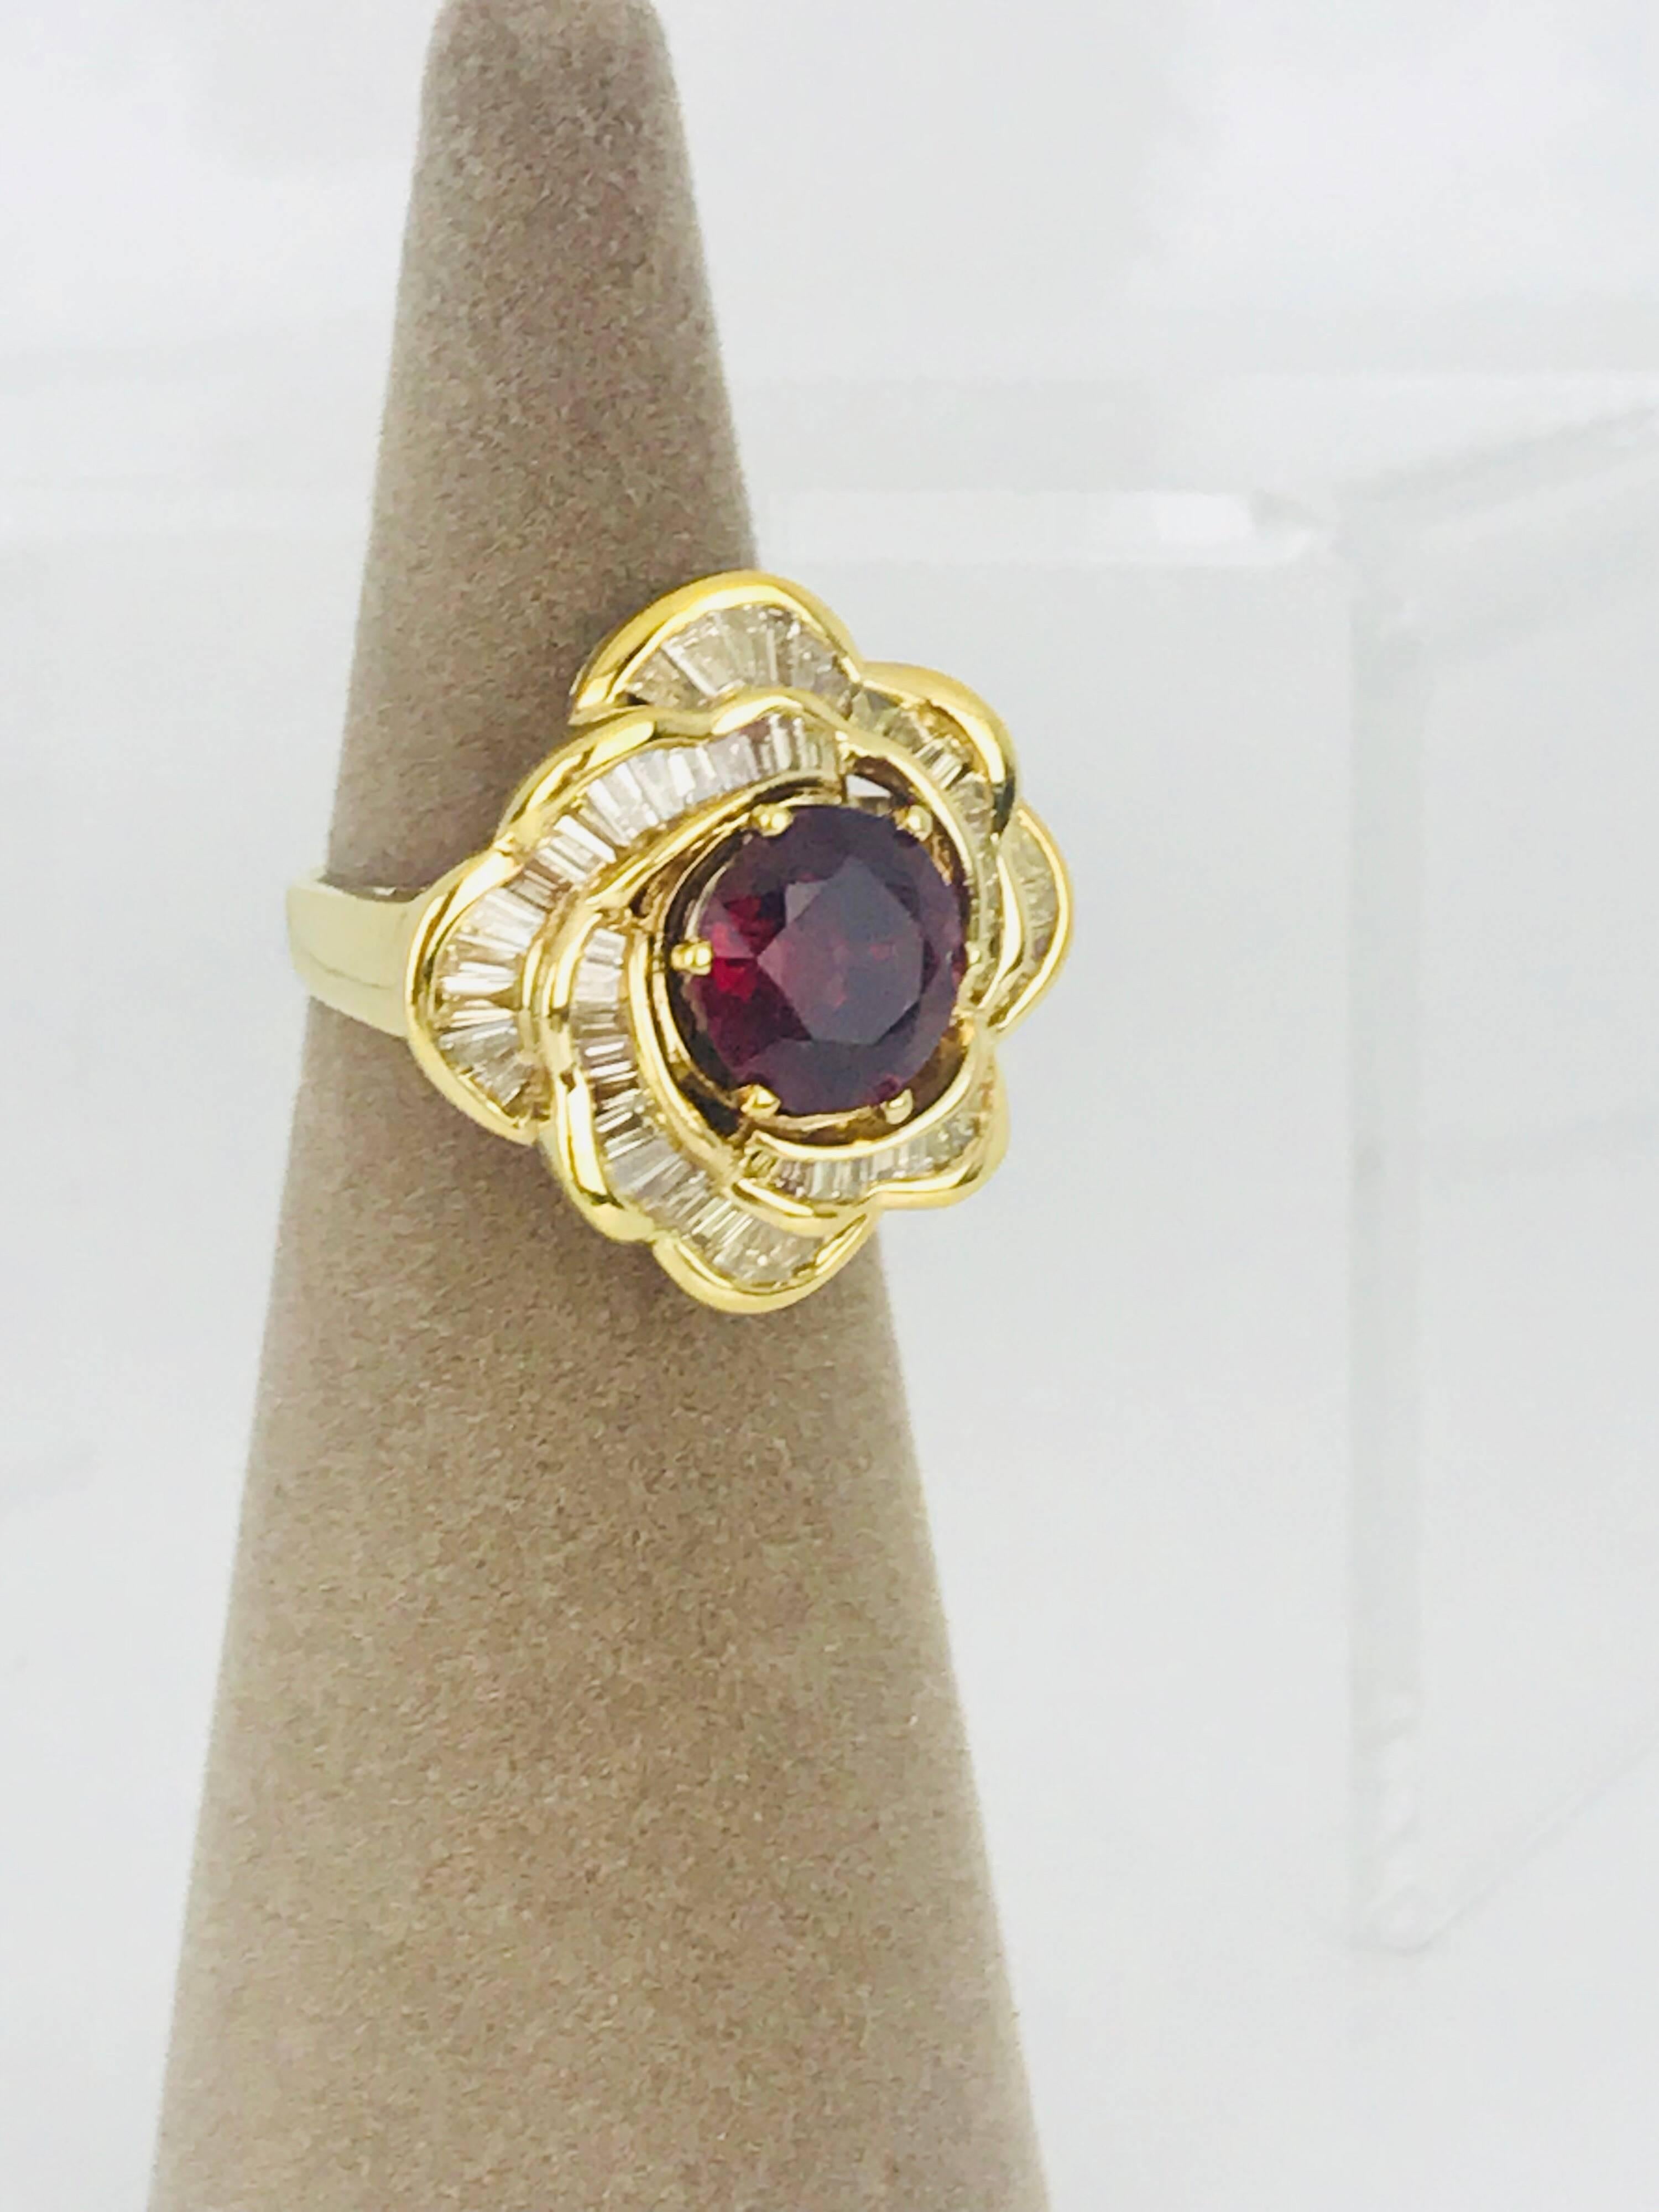 18 Karat yellow gold diamond, Ballerina-style ring. The center is a round brilliant cut Rhodolite garnet with 64, surrounding tapered diamond baguettes. 

The total diamond weight is approximately 3.00 carats. 
The quality of the diamonds are